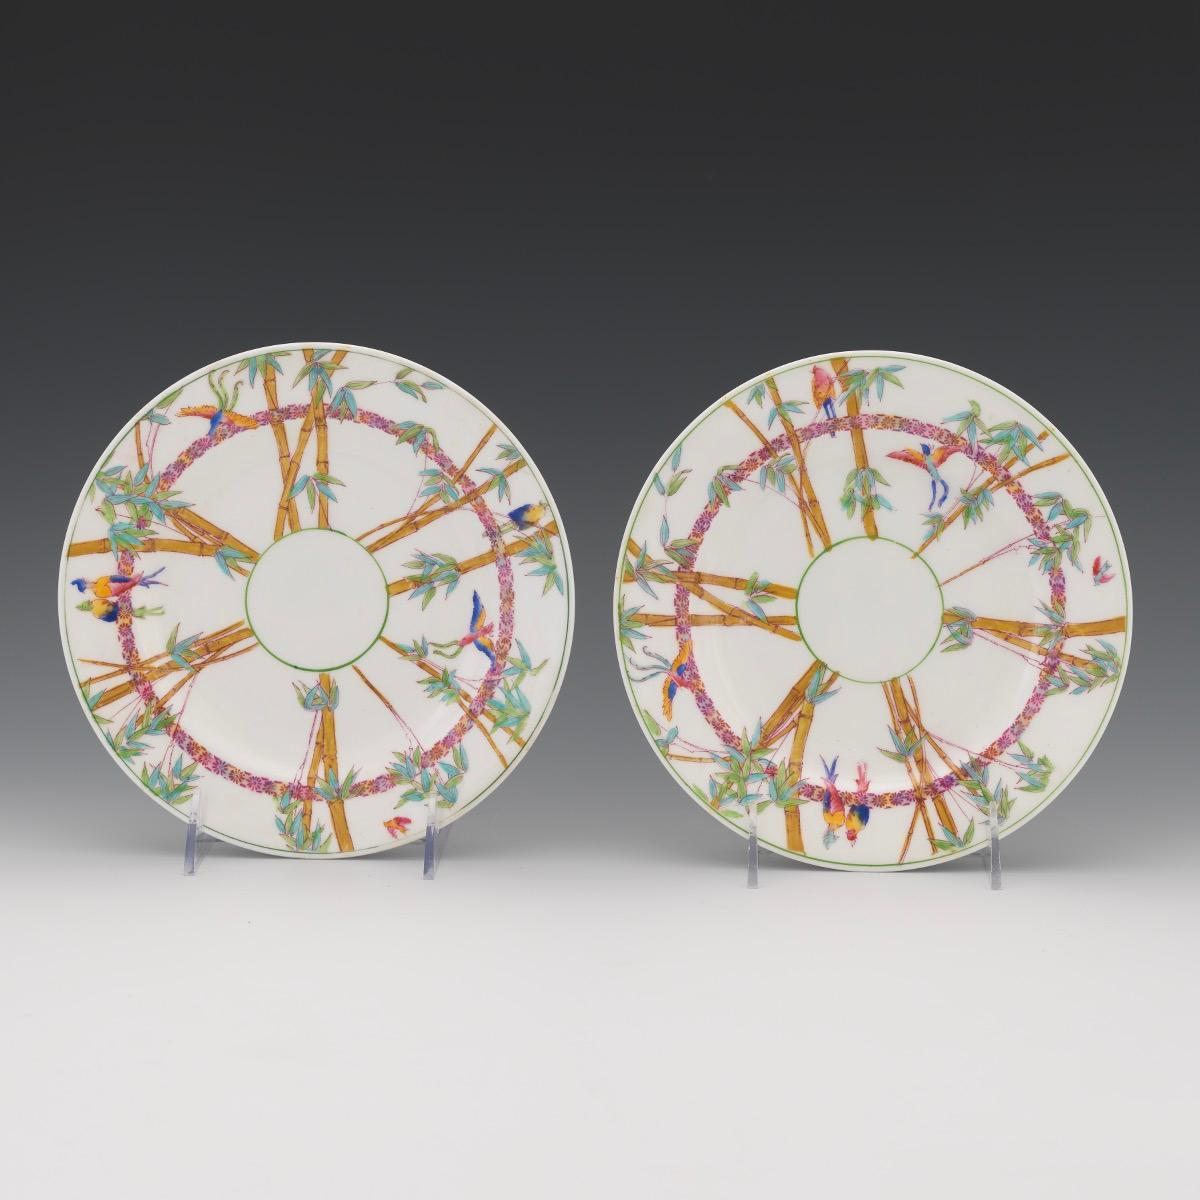 Tropical birds amongst bamboo set of 12 plates,
George Jones & Sons for Tiffany & Co.
Early 20th century

The George Jones porcelain plates are each decorated with a charming design of roosting and flying exotic tropical birds amongst bamboo